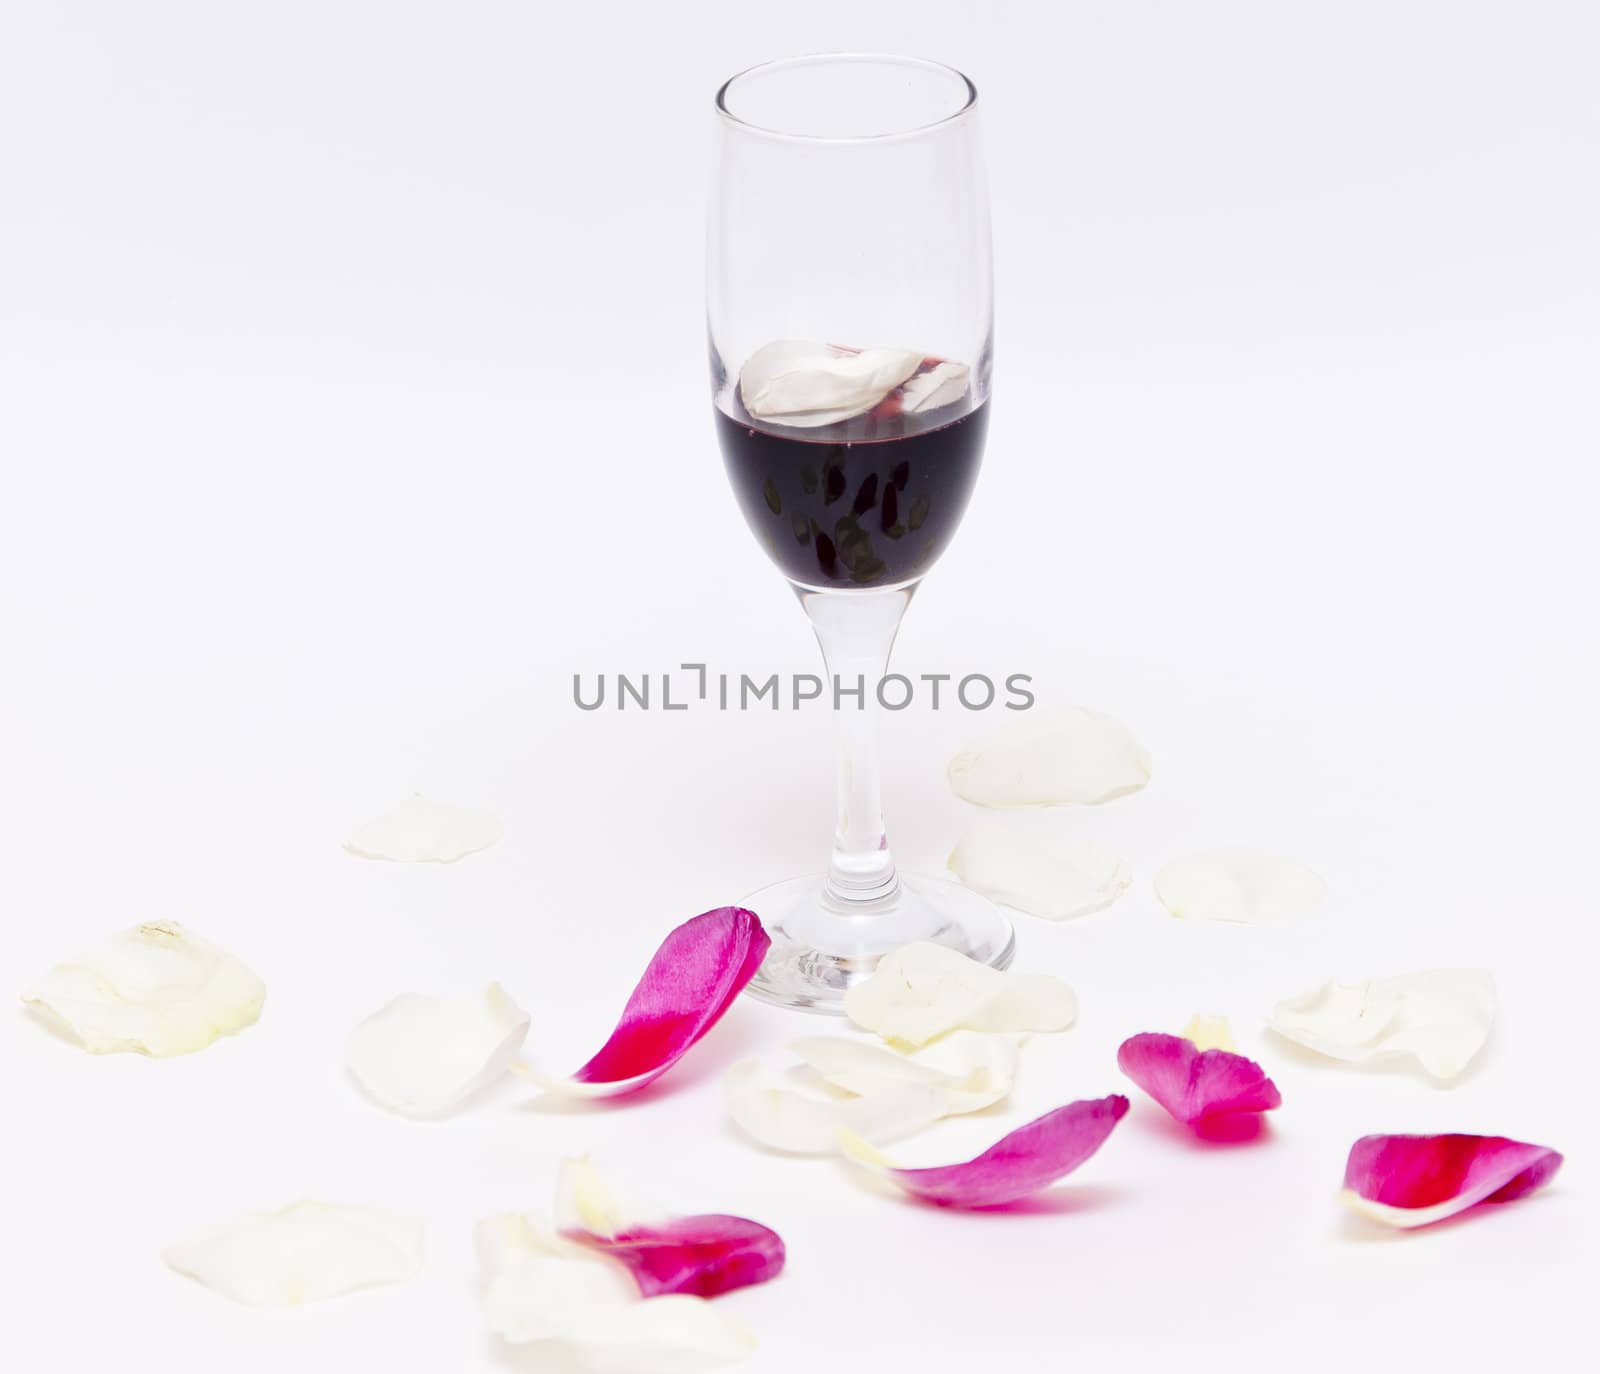 Petals of white rose with red wine glass